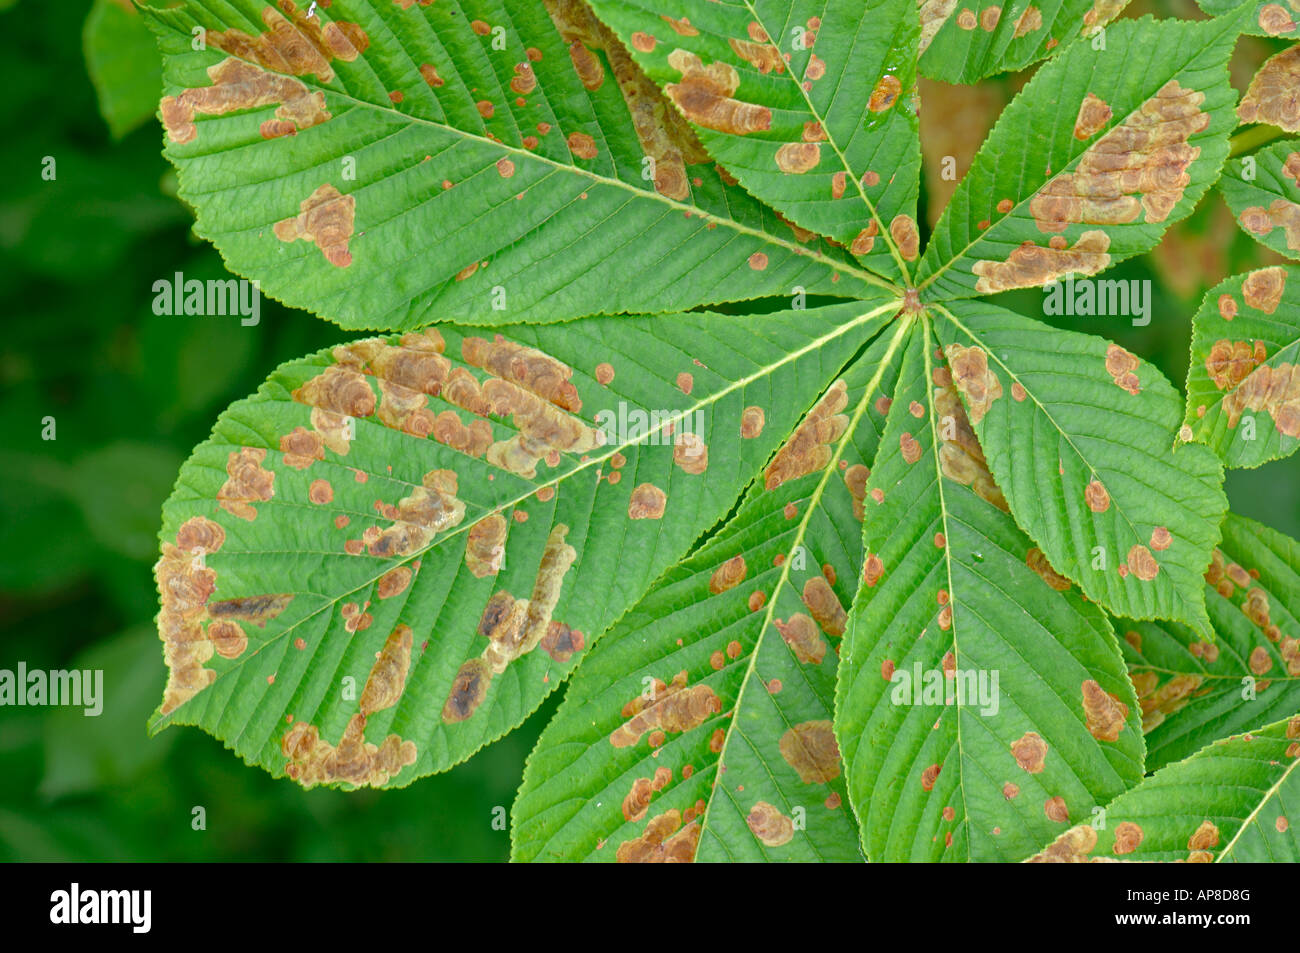 Leaf of Horse Chestnut (Aesculus hippocatsanum) being destroyed by Horse Chestnut Leafminer (Cameraria ohridella) Stock Photo